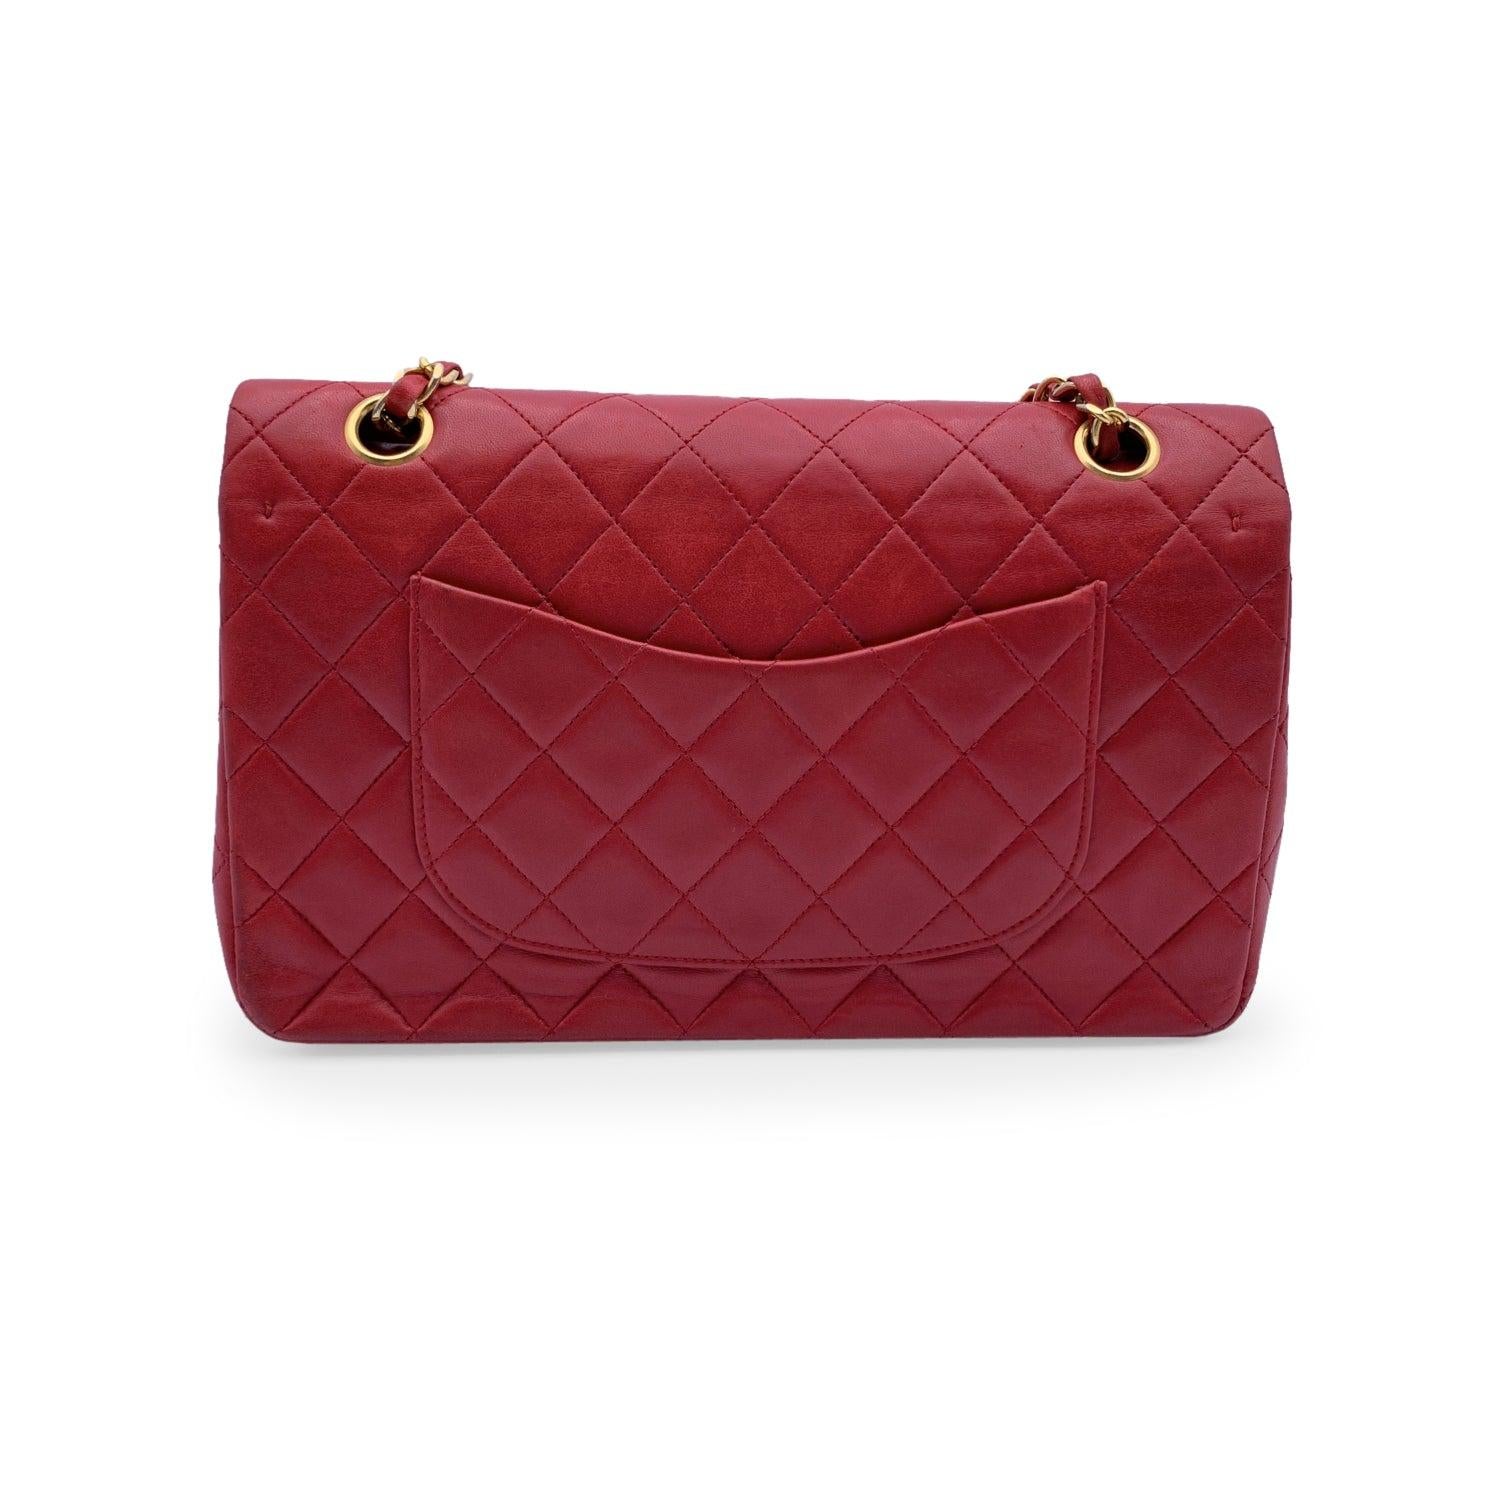 Women's Chanel Vintage Red Quilted Timeless Classic 2.55 Shoulder Bag 25 cm